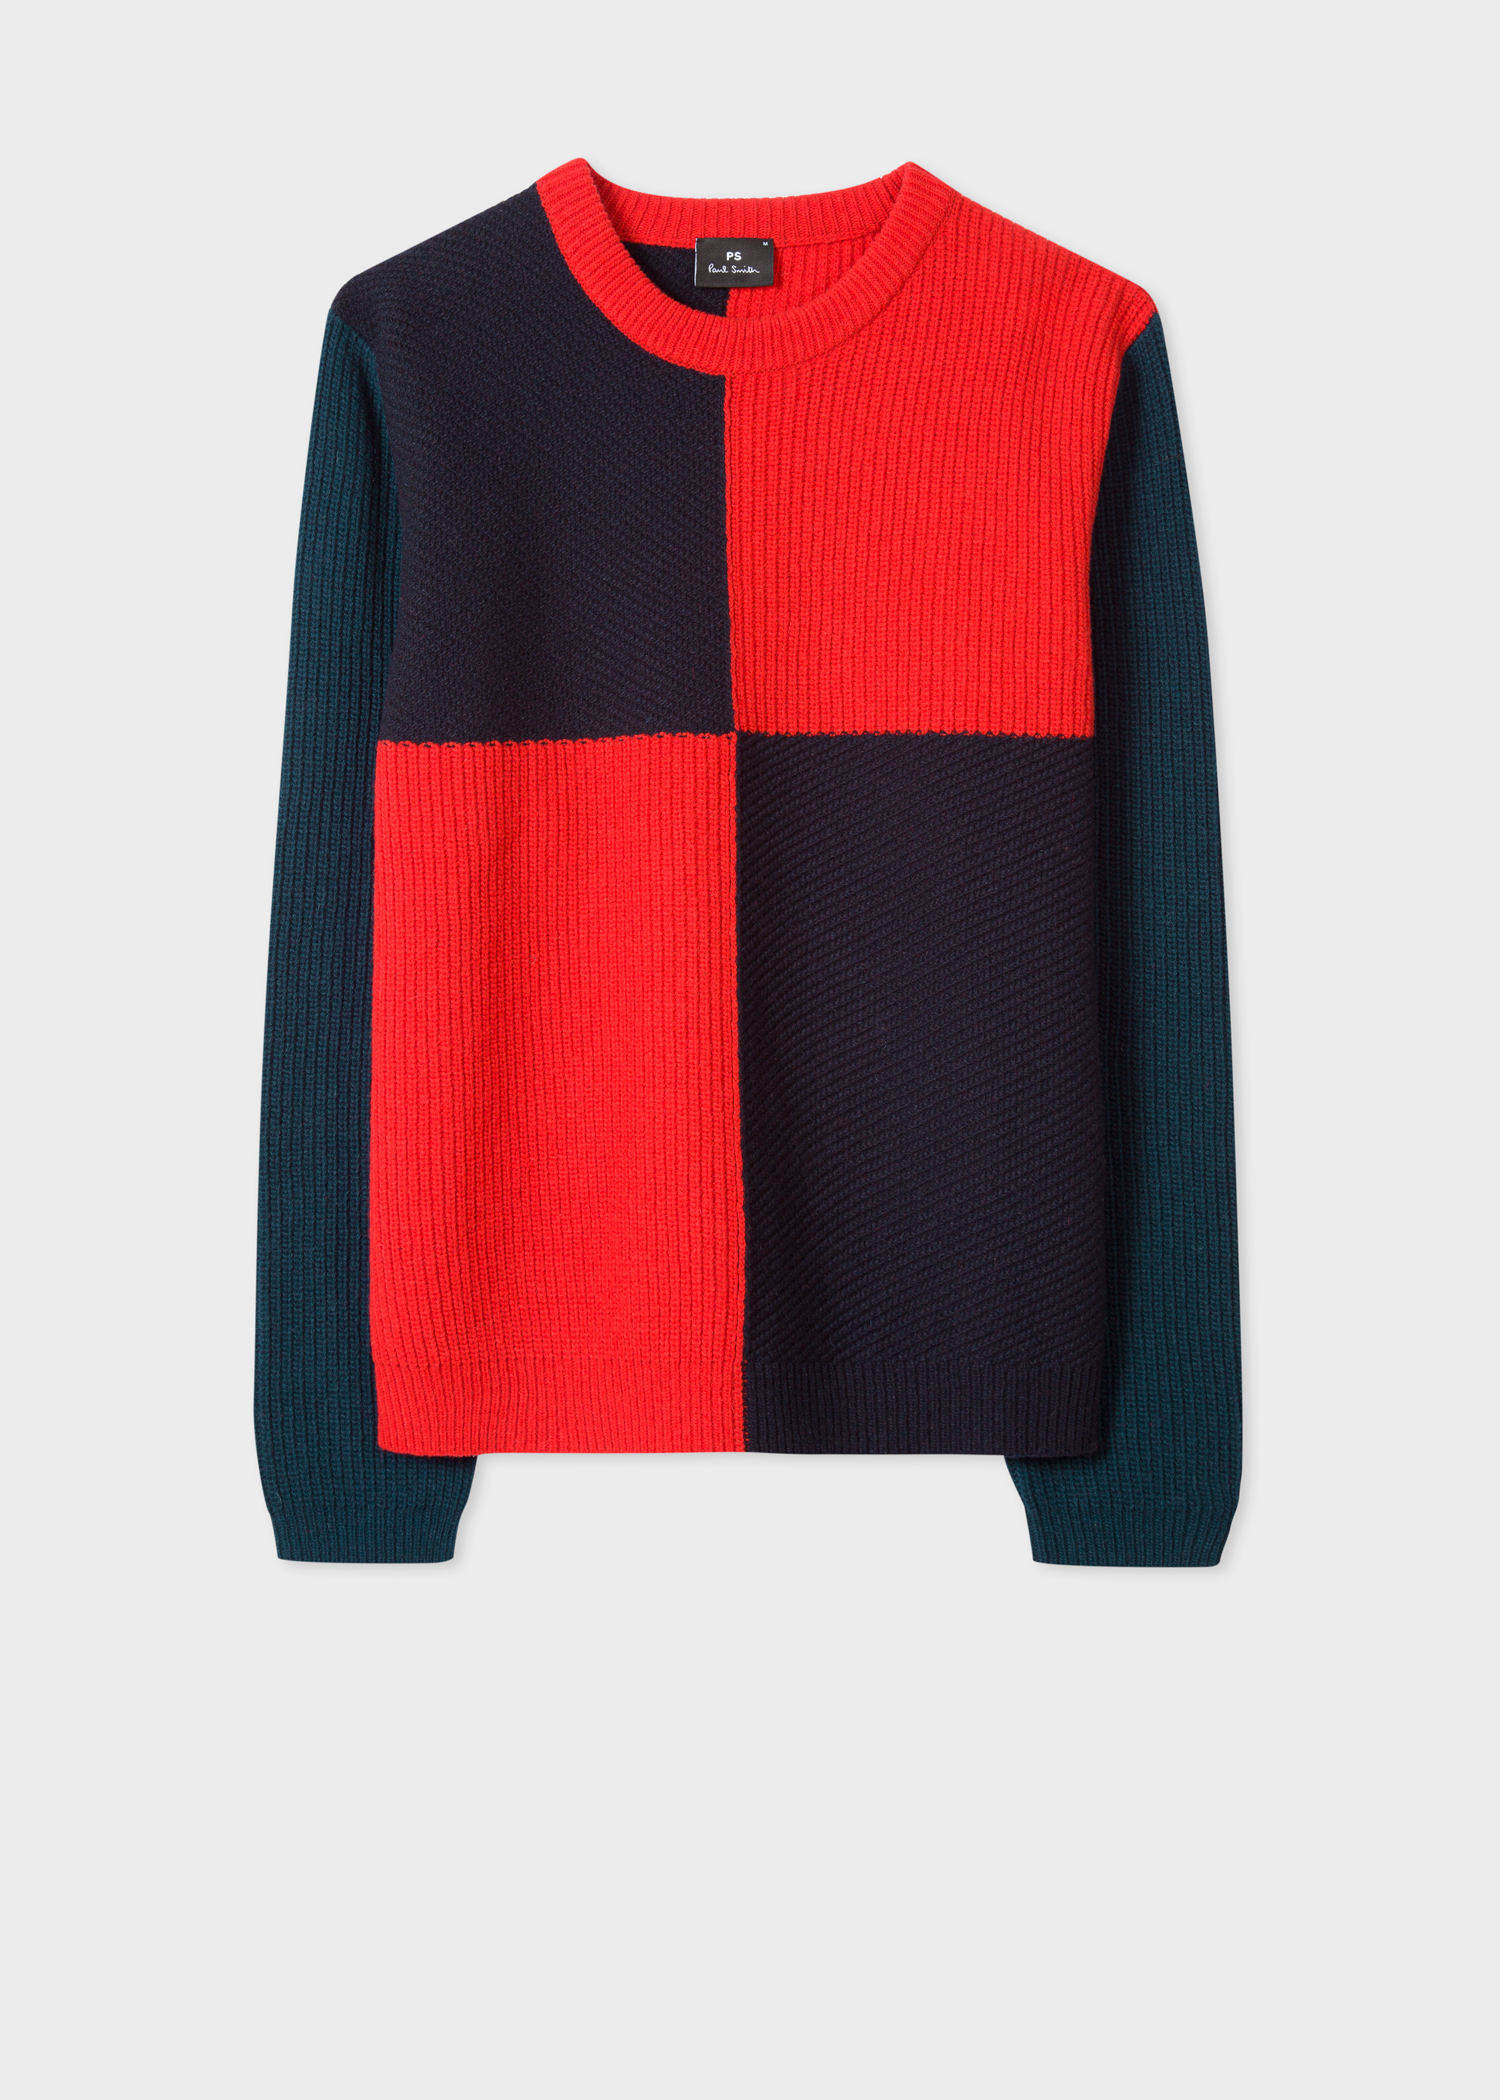 Front view - Men's Red And Navy Wool-Blend Large-Check Sweater Paul Smith